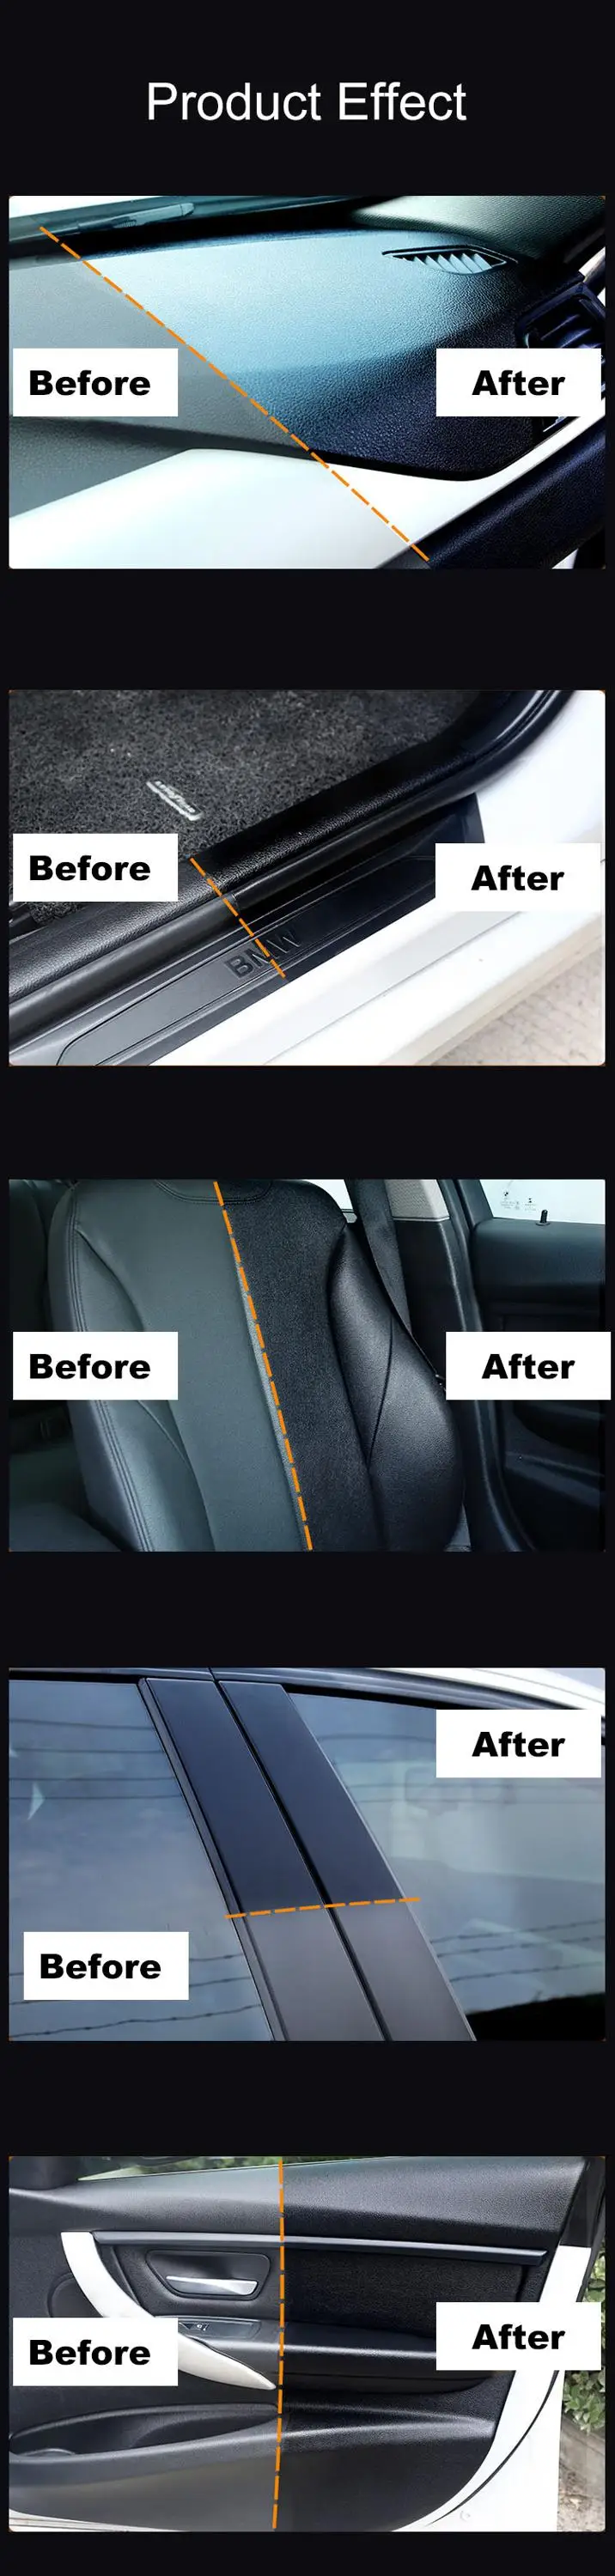 China manufacturer Car Detail Gentle Care Cleaning Dashboard Wax Polish Spray